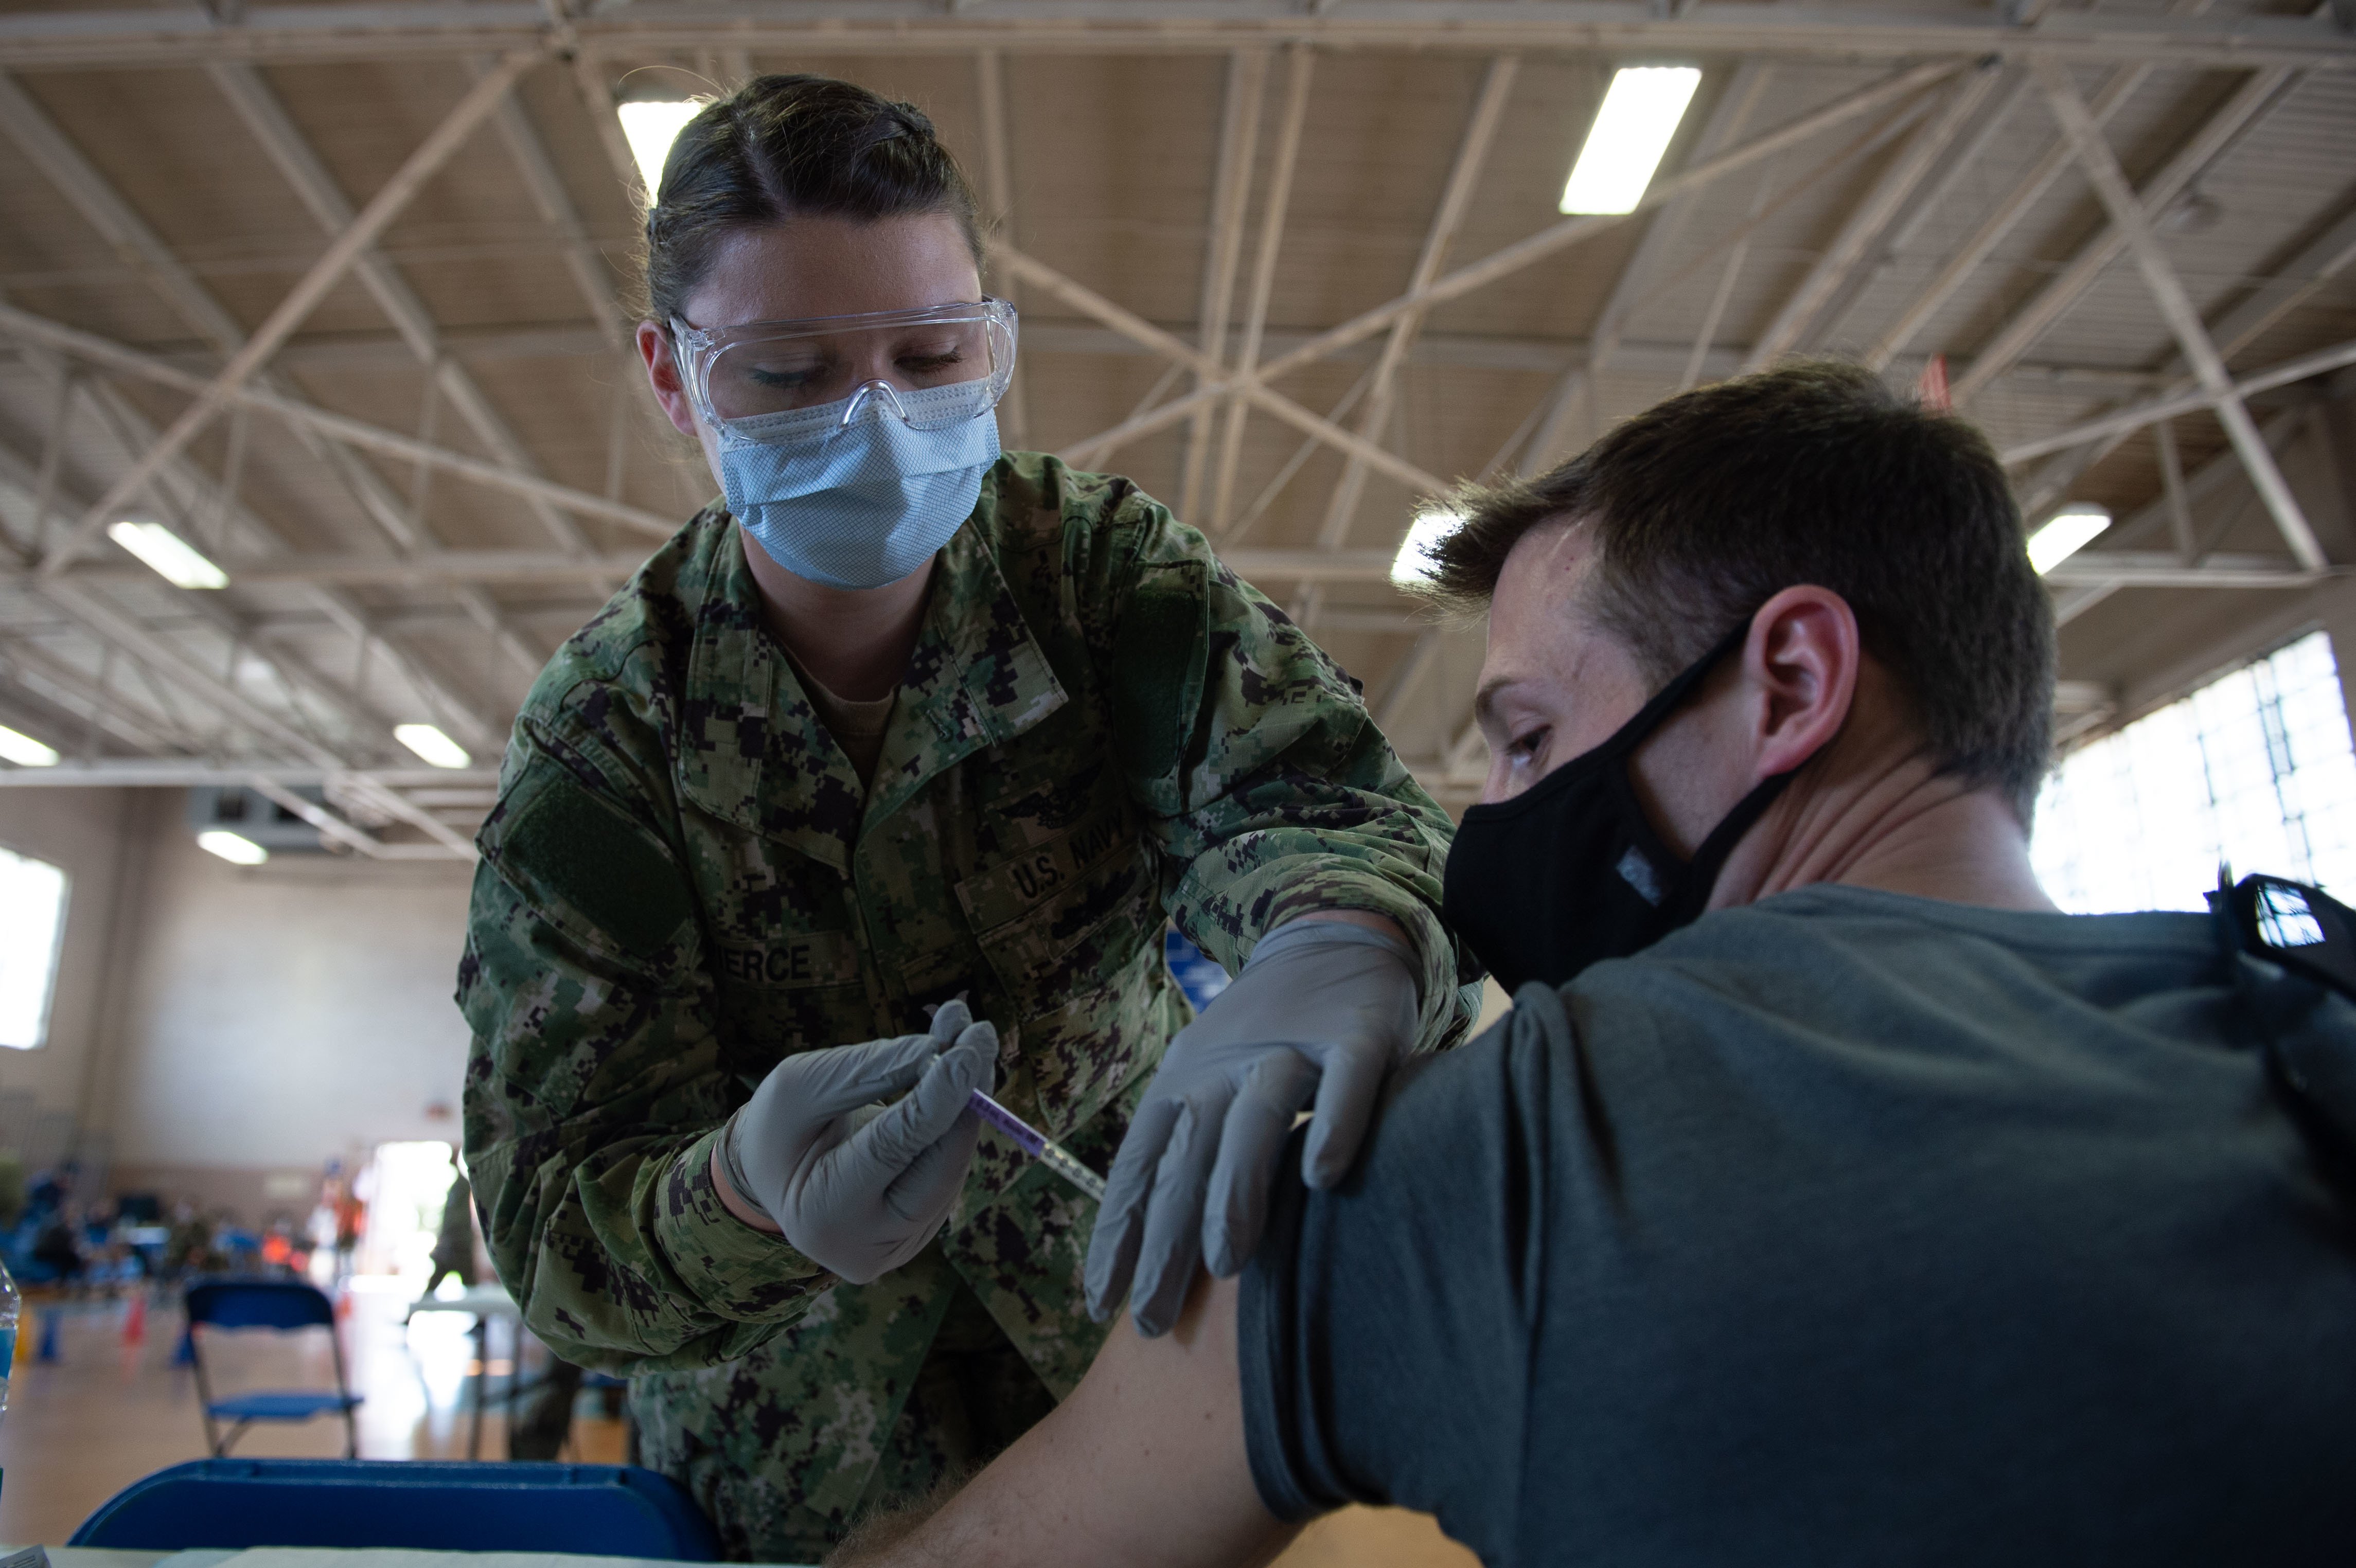 97% of Active-Duty Sailors Fully Vaccinated With Four Days Until Deadline